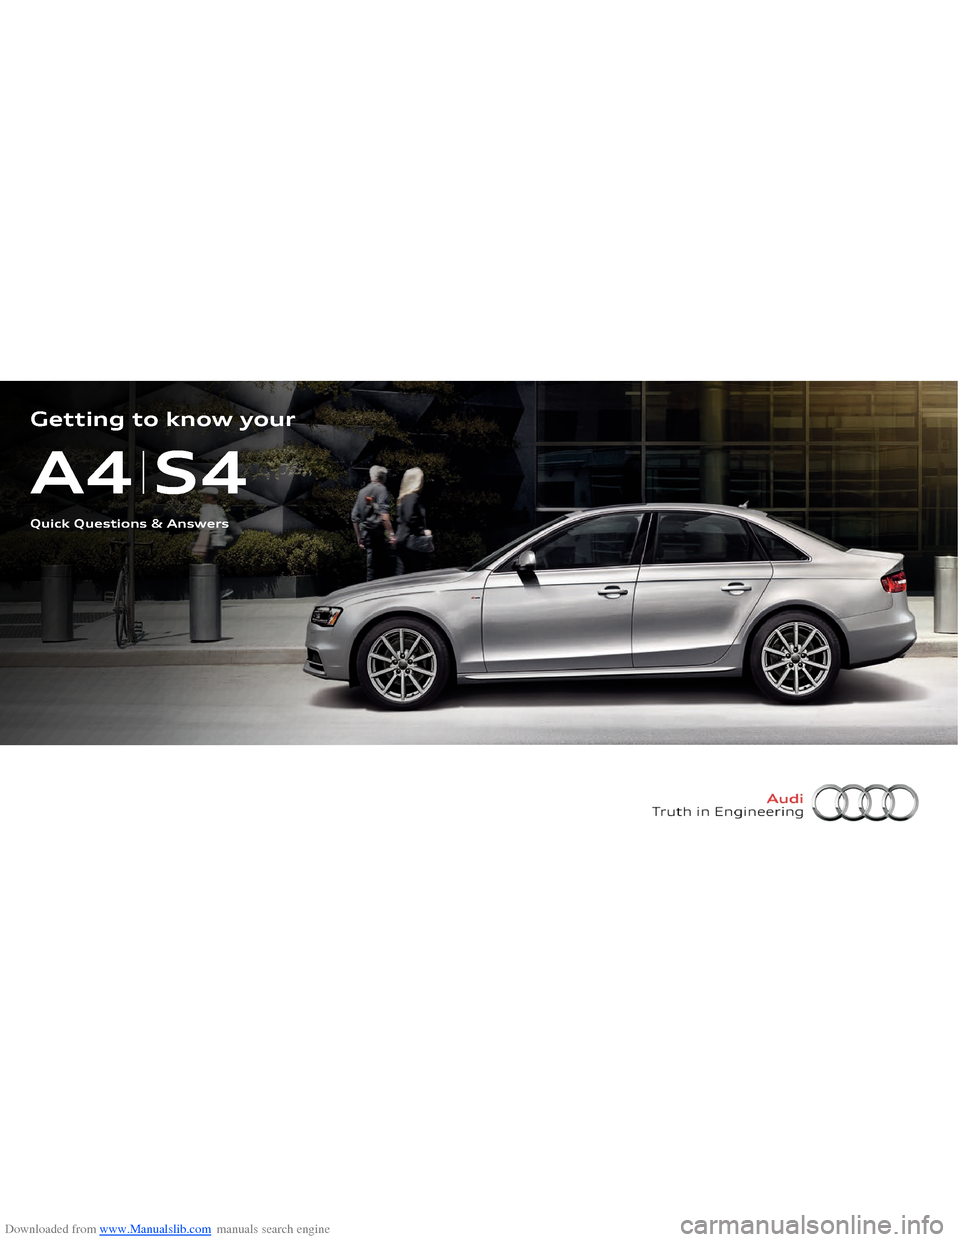 AUDI A4 2014 B8 / 4.G Getting To Know 